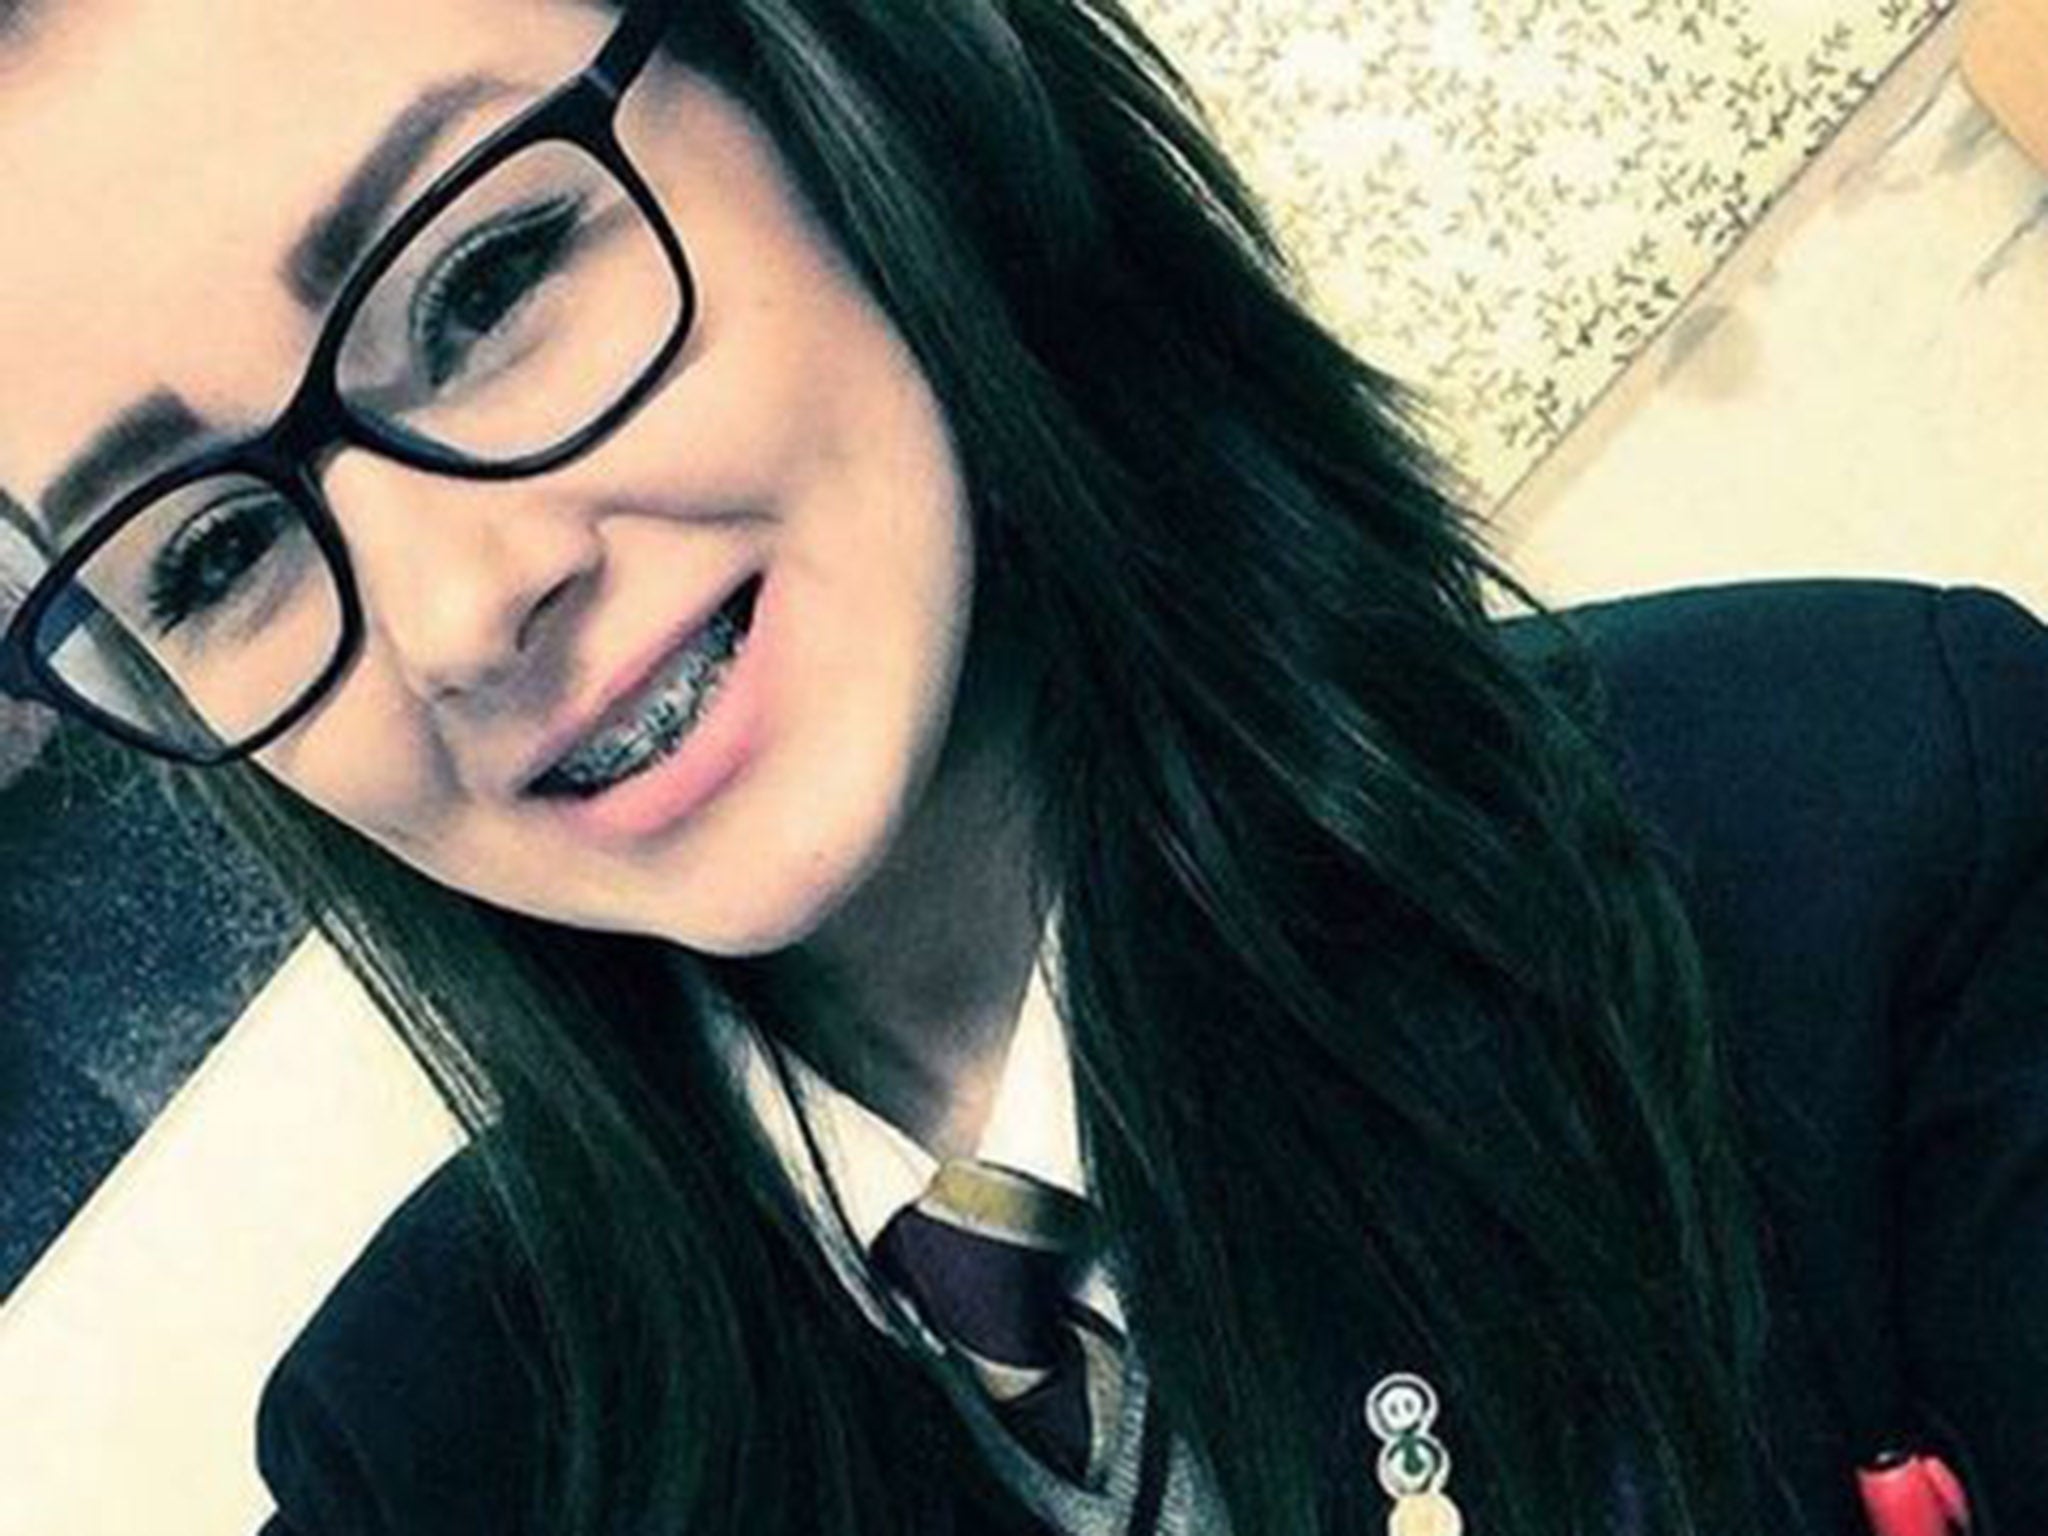 Jade Lynch is described as white, 5ft 6in tall with long, straight black hair